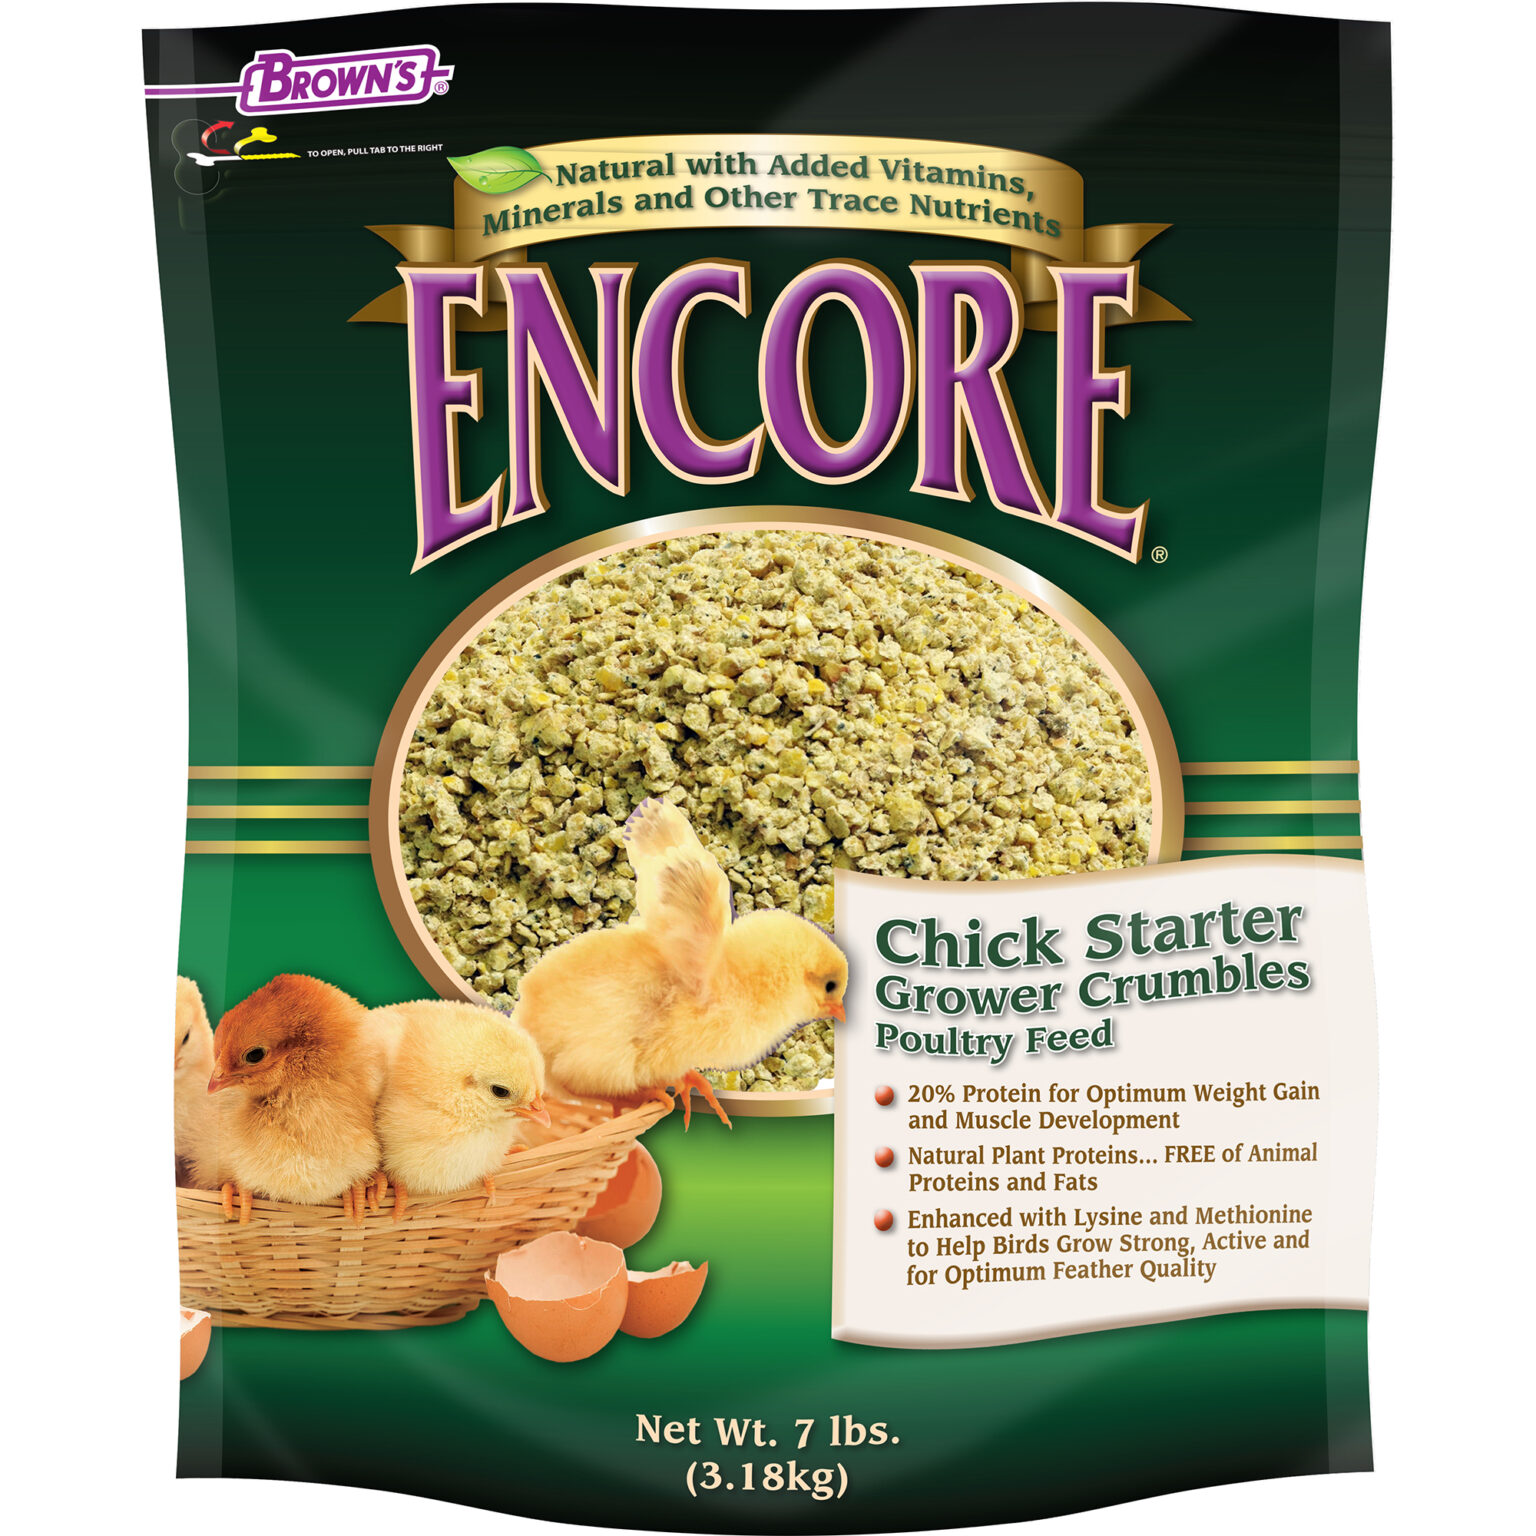 Browns Pet Food Encore® Chick Starter Grower Crumbles Poultry Feed